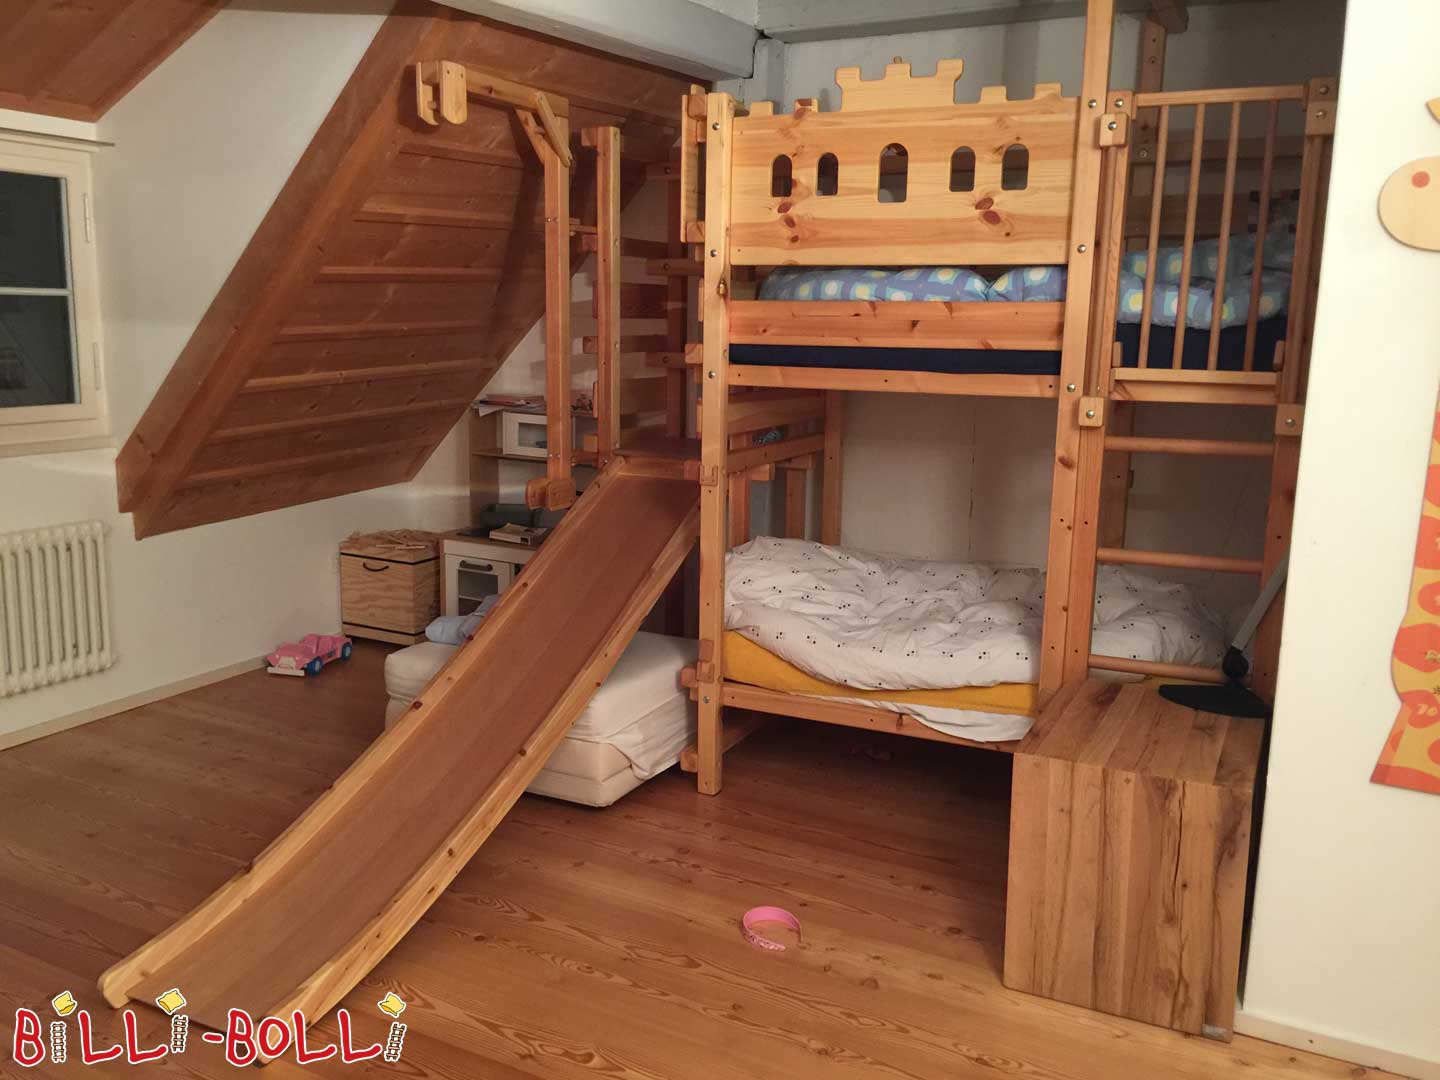 Bed over-corner, side-offset, bunk bed with slide tower (Category: second hand baby crib)